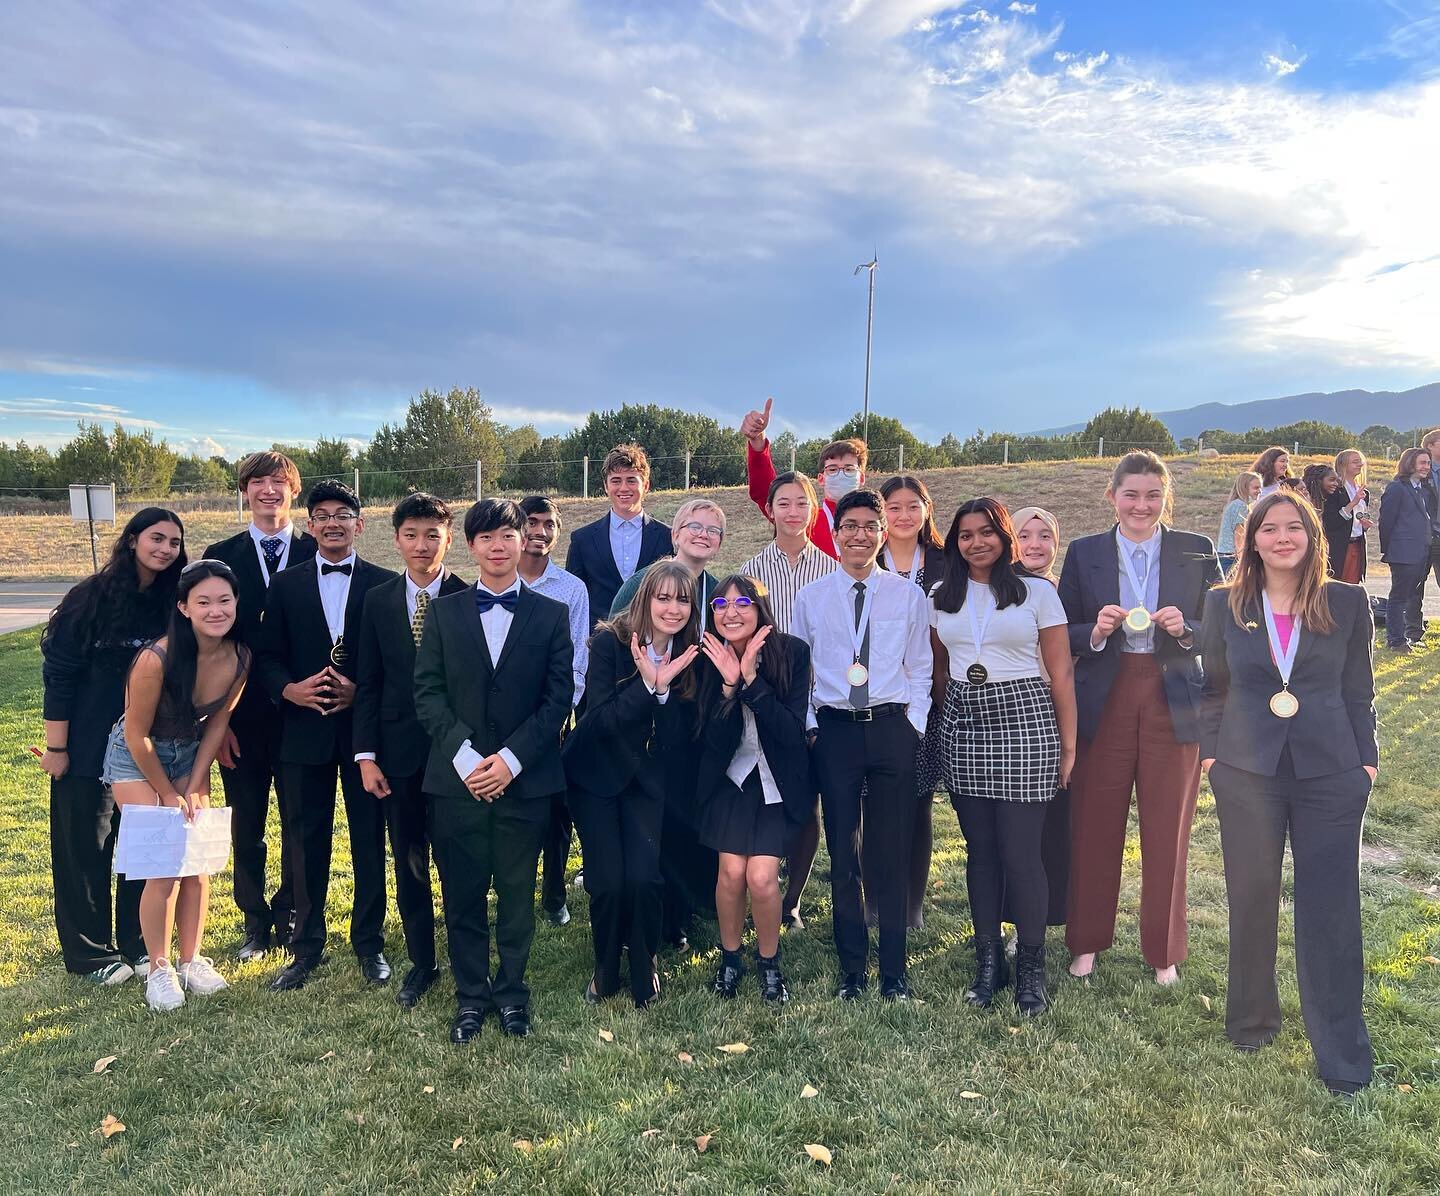 Congrats to all our competitors for their INCREDIBLE showing at the East Mountain Top of the World Invitational on Oct 15th! Our first full in-person tournament was a huge success. 

🥇🥈1st and 2nd in CX
🥇1st place in VLD
🥈2nd place in NLD
🥇1st p